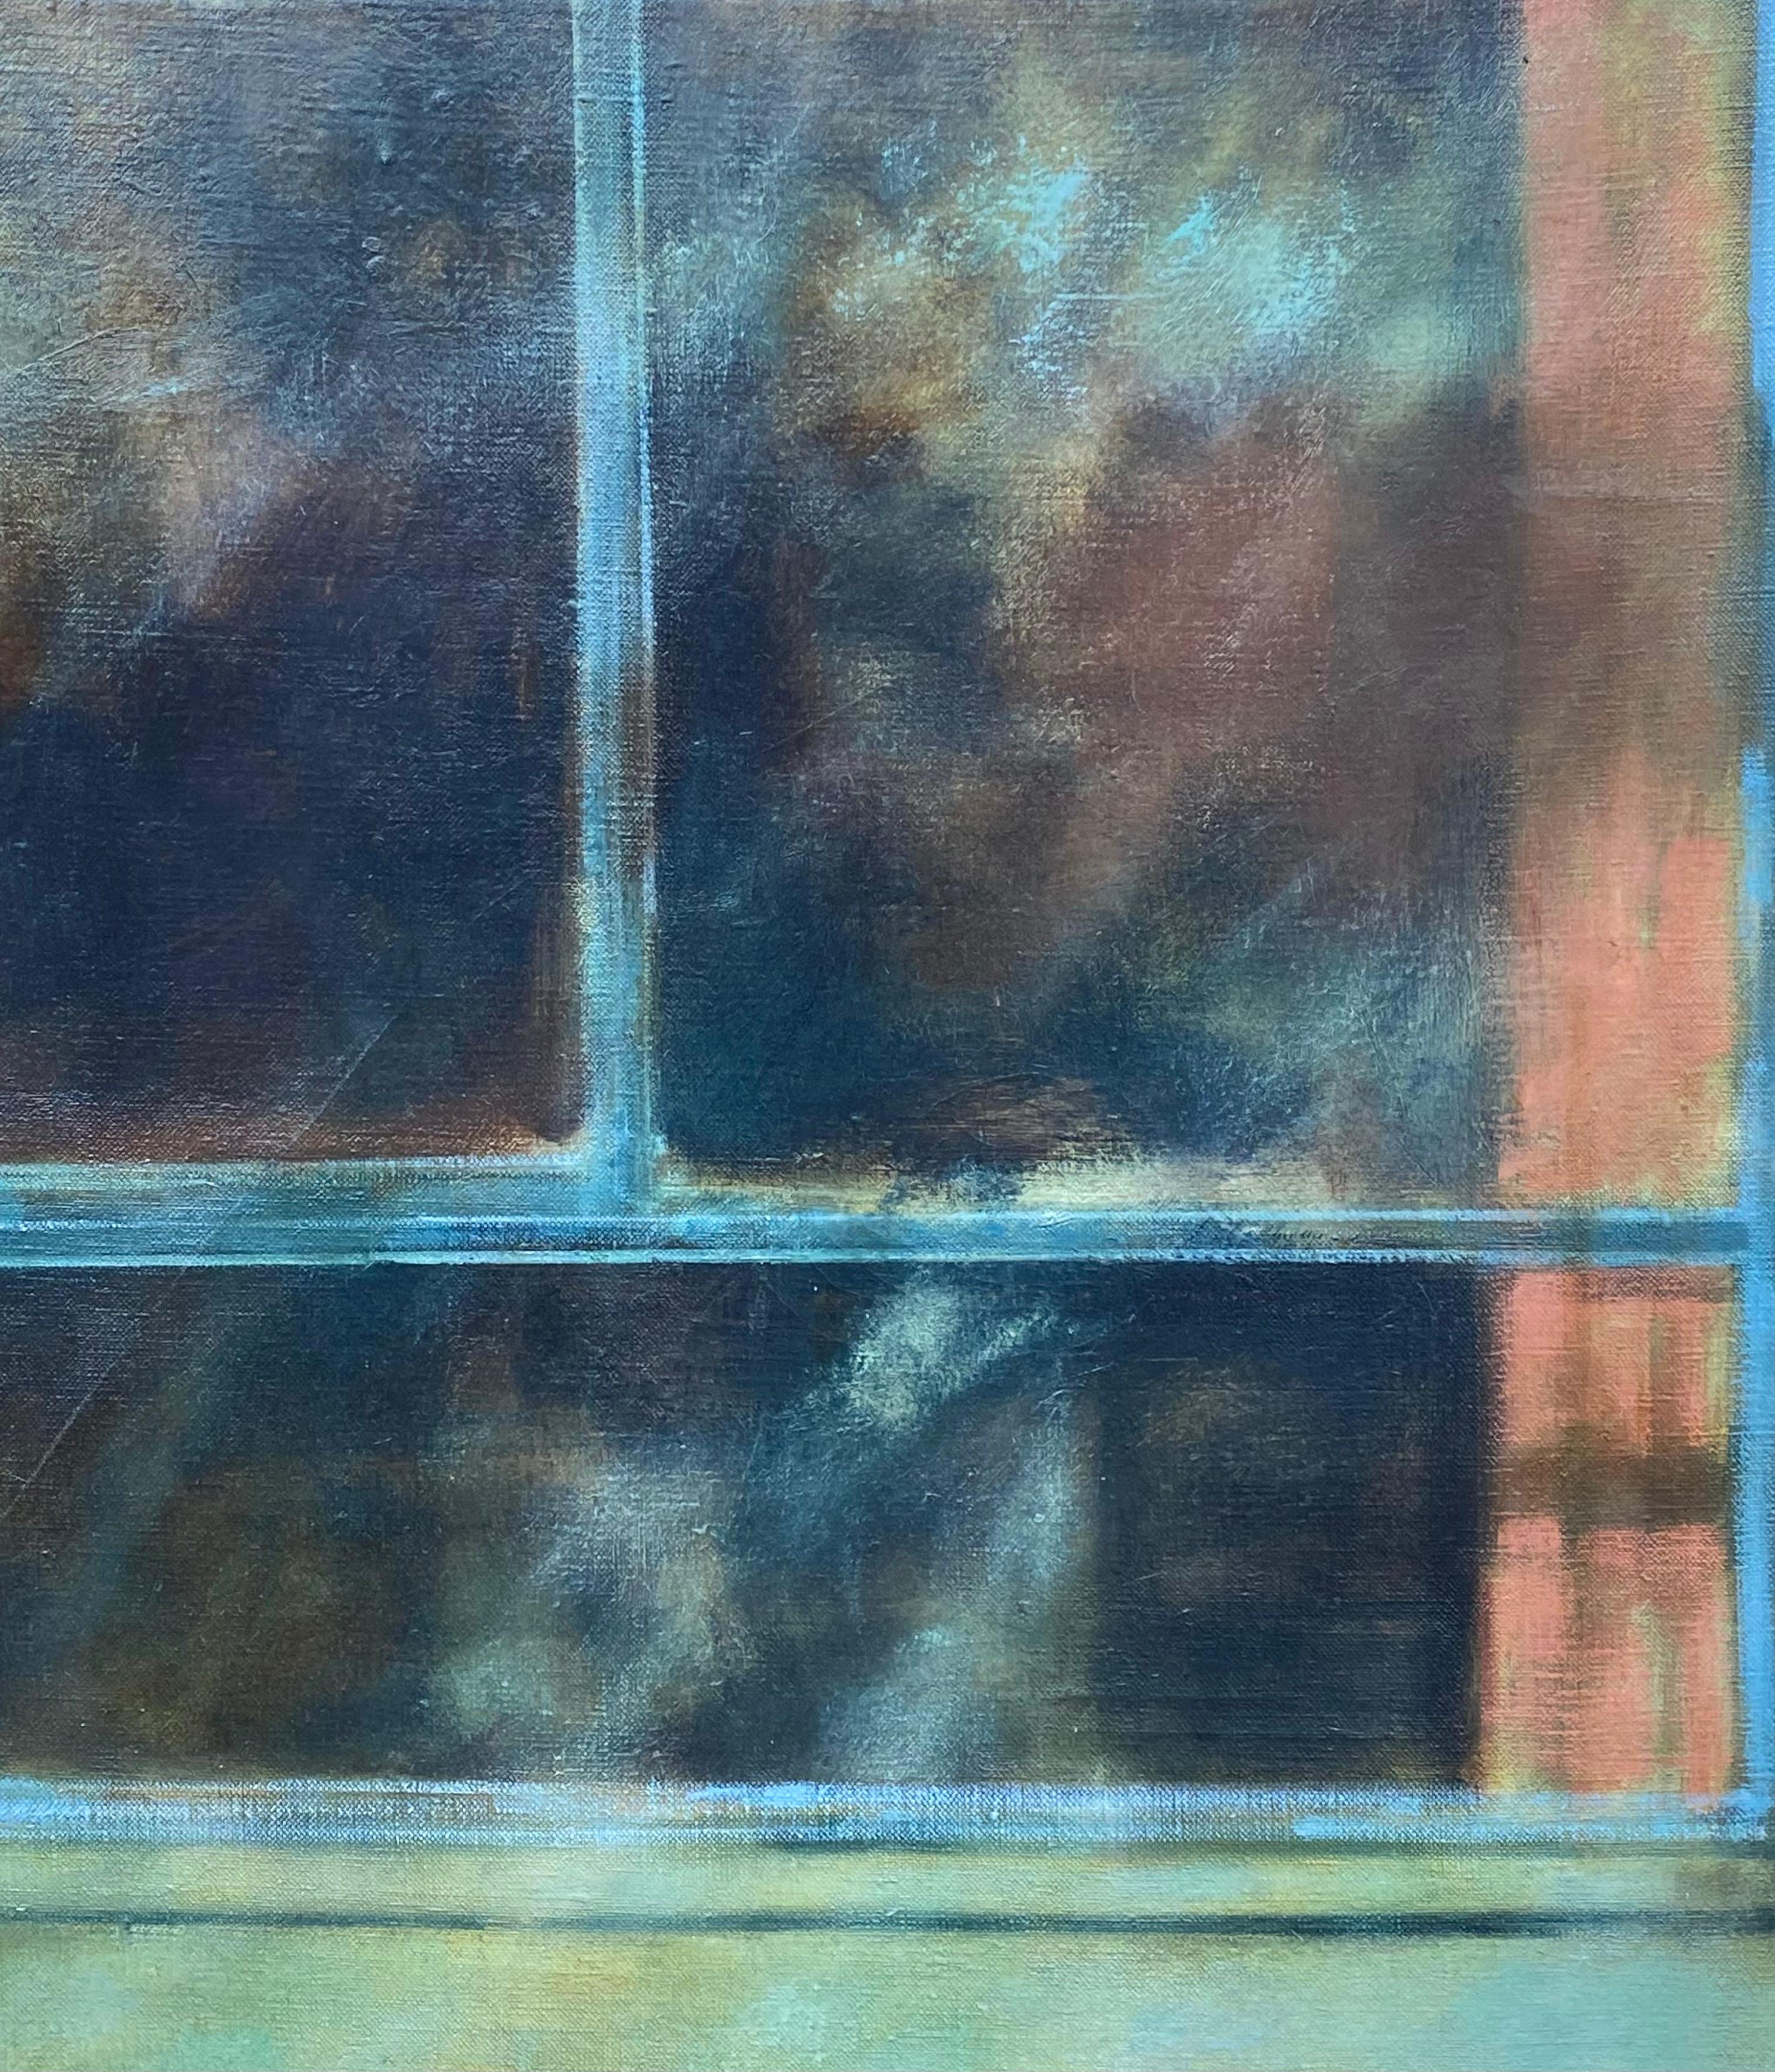 
Very unique original oil on canvas painting by the well known American artist, John Barnes Dobbs.  Titled “Motel Window” and if you look carefully you can see two figures (faces) looking out of the window in the top right and left pane of the